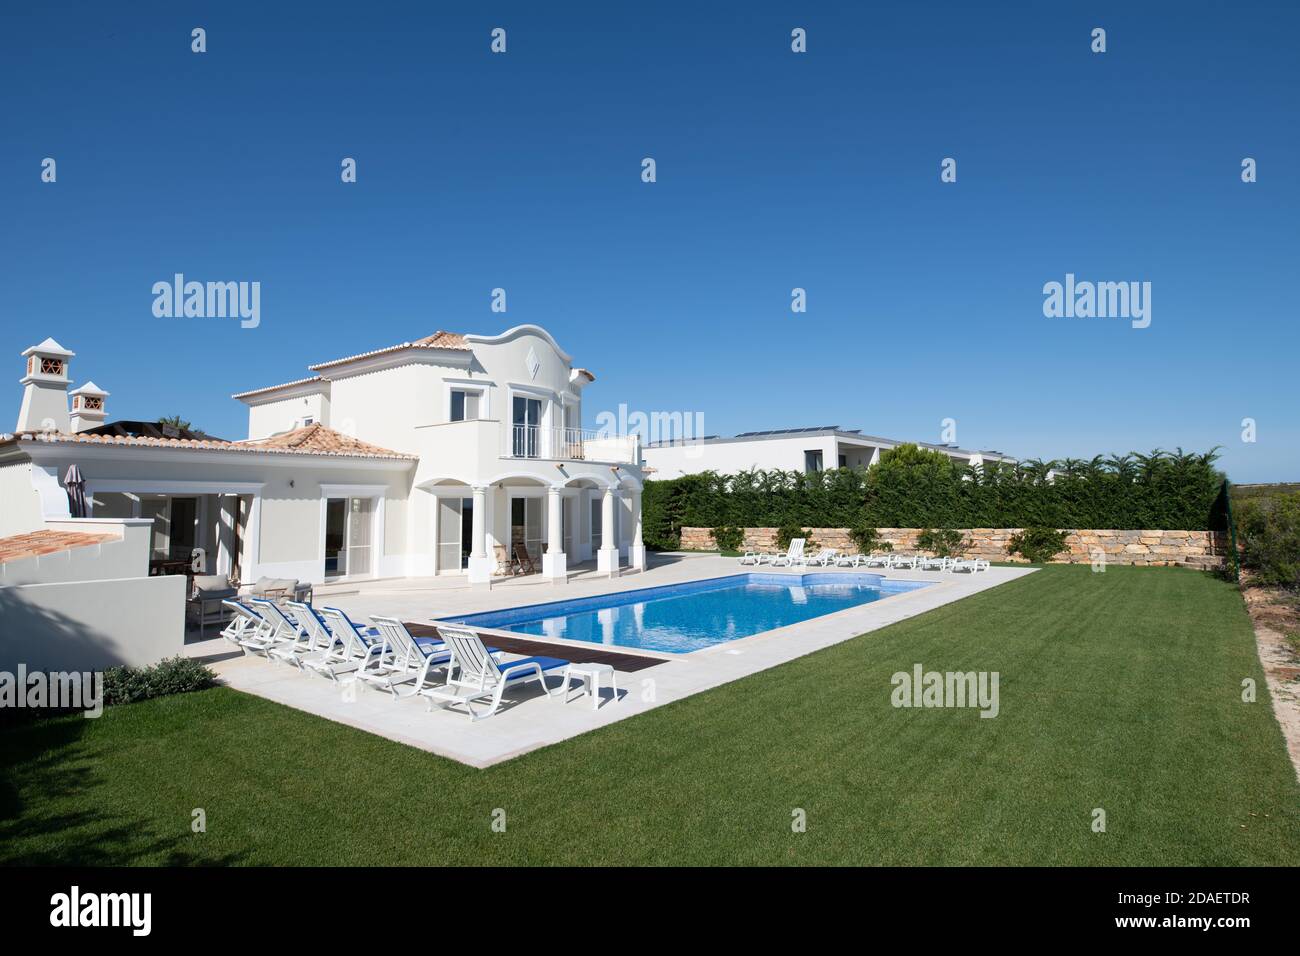 Exterior of luxury Holiday Villa with blue sky and beautiful swimming pool Stock Photo